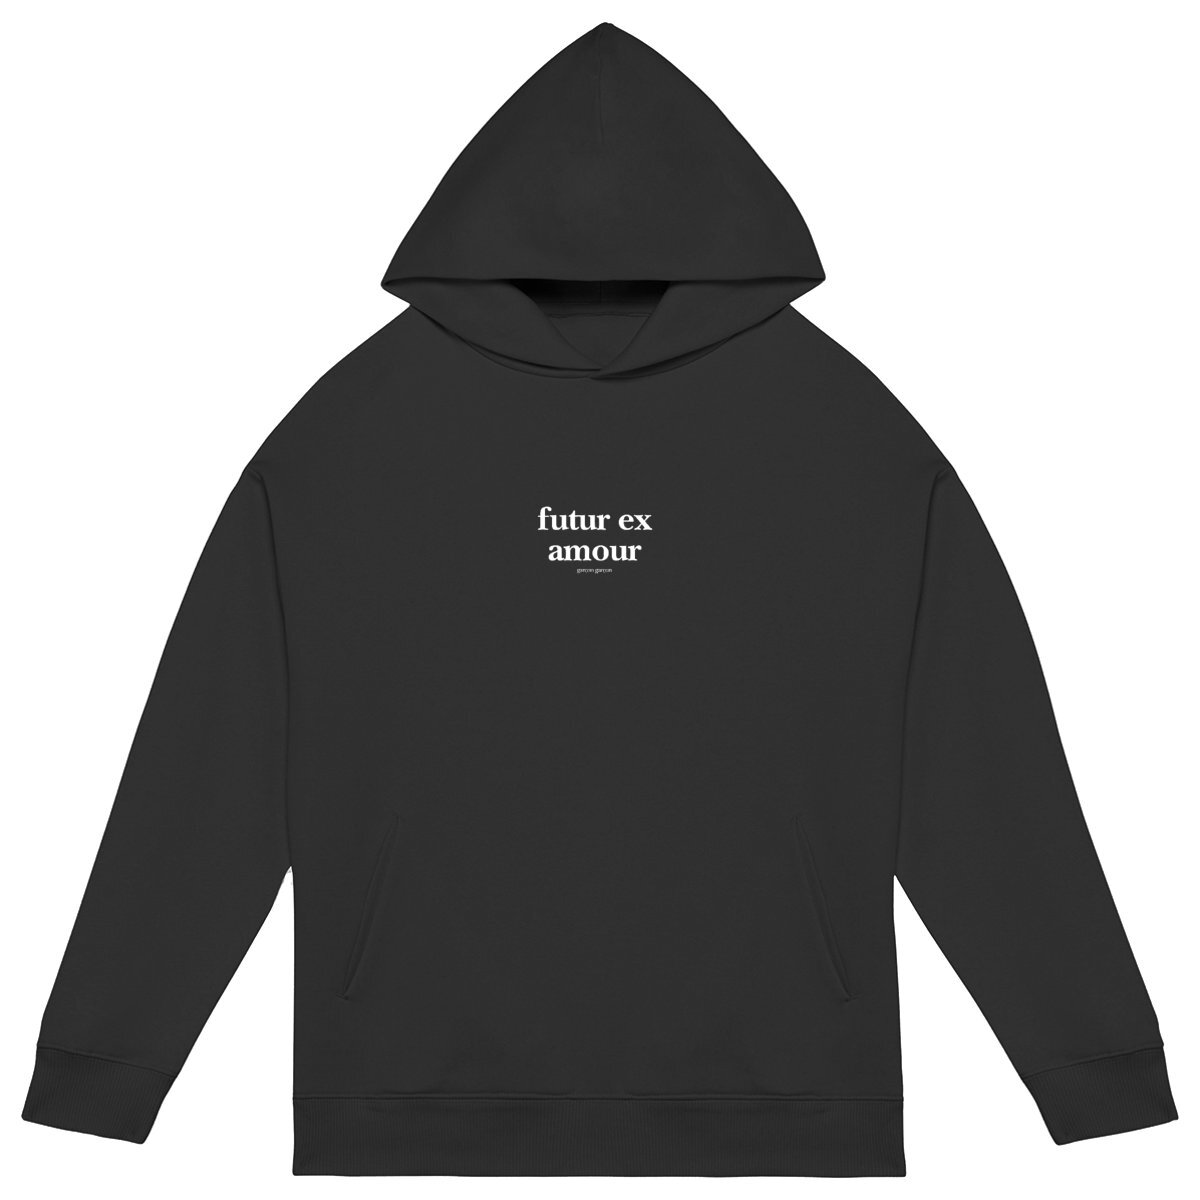 futur ex amour  hoodie oversized. garçon garçon essentiel oversized hoodie. Sleek in black and whispering Parisian chic, this hoodie is the sartorial whisper of 'garçon garçon' — a statement of understated elegance. Perfect for those who carry a piece of Paris in their hearts and a touch of audacity on their sleeves.